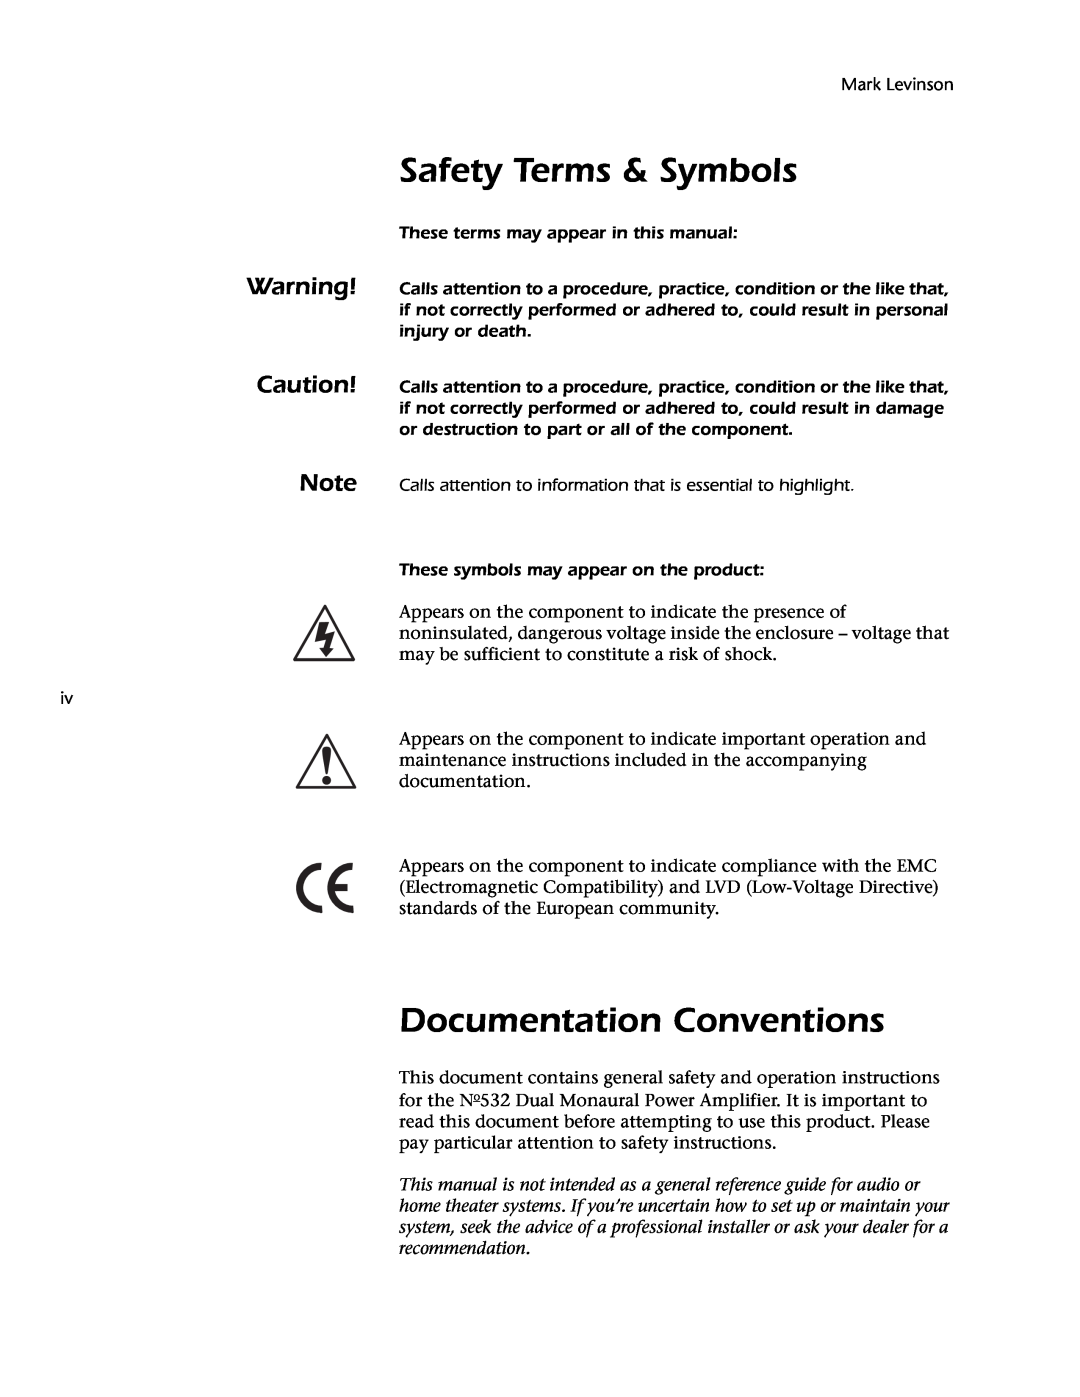 Mark Levinson 532 owner manual Safety Terms & Symbols, Documentation Conventions 